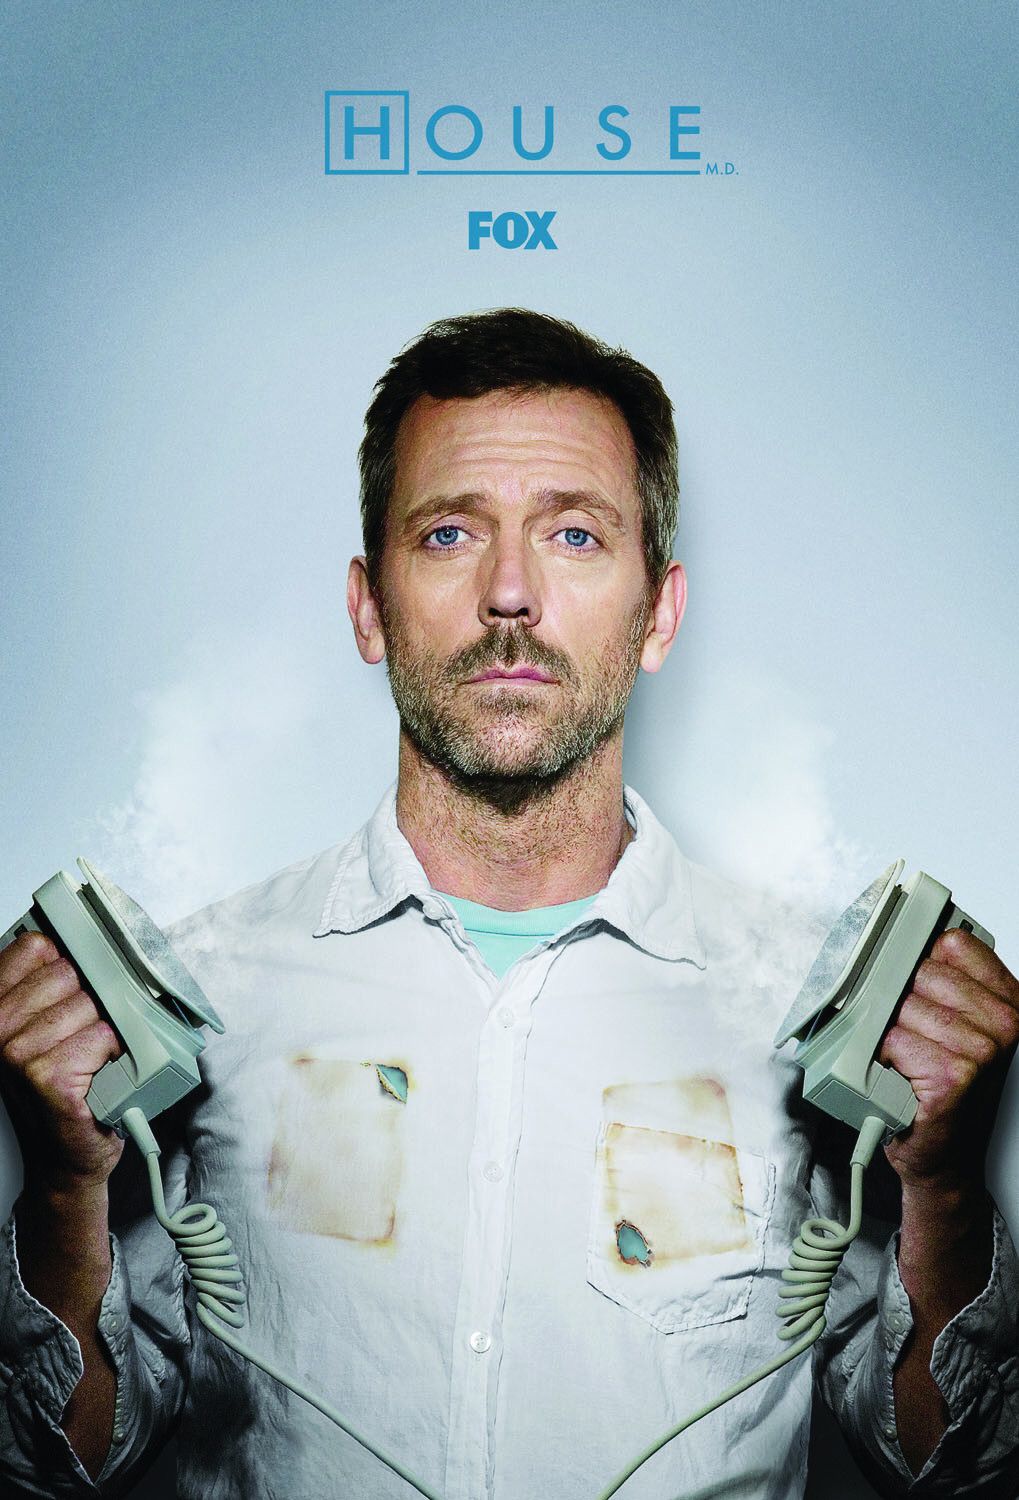 Extra Large TV Poster Image for House, M.D. (#6 of 20)